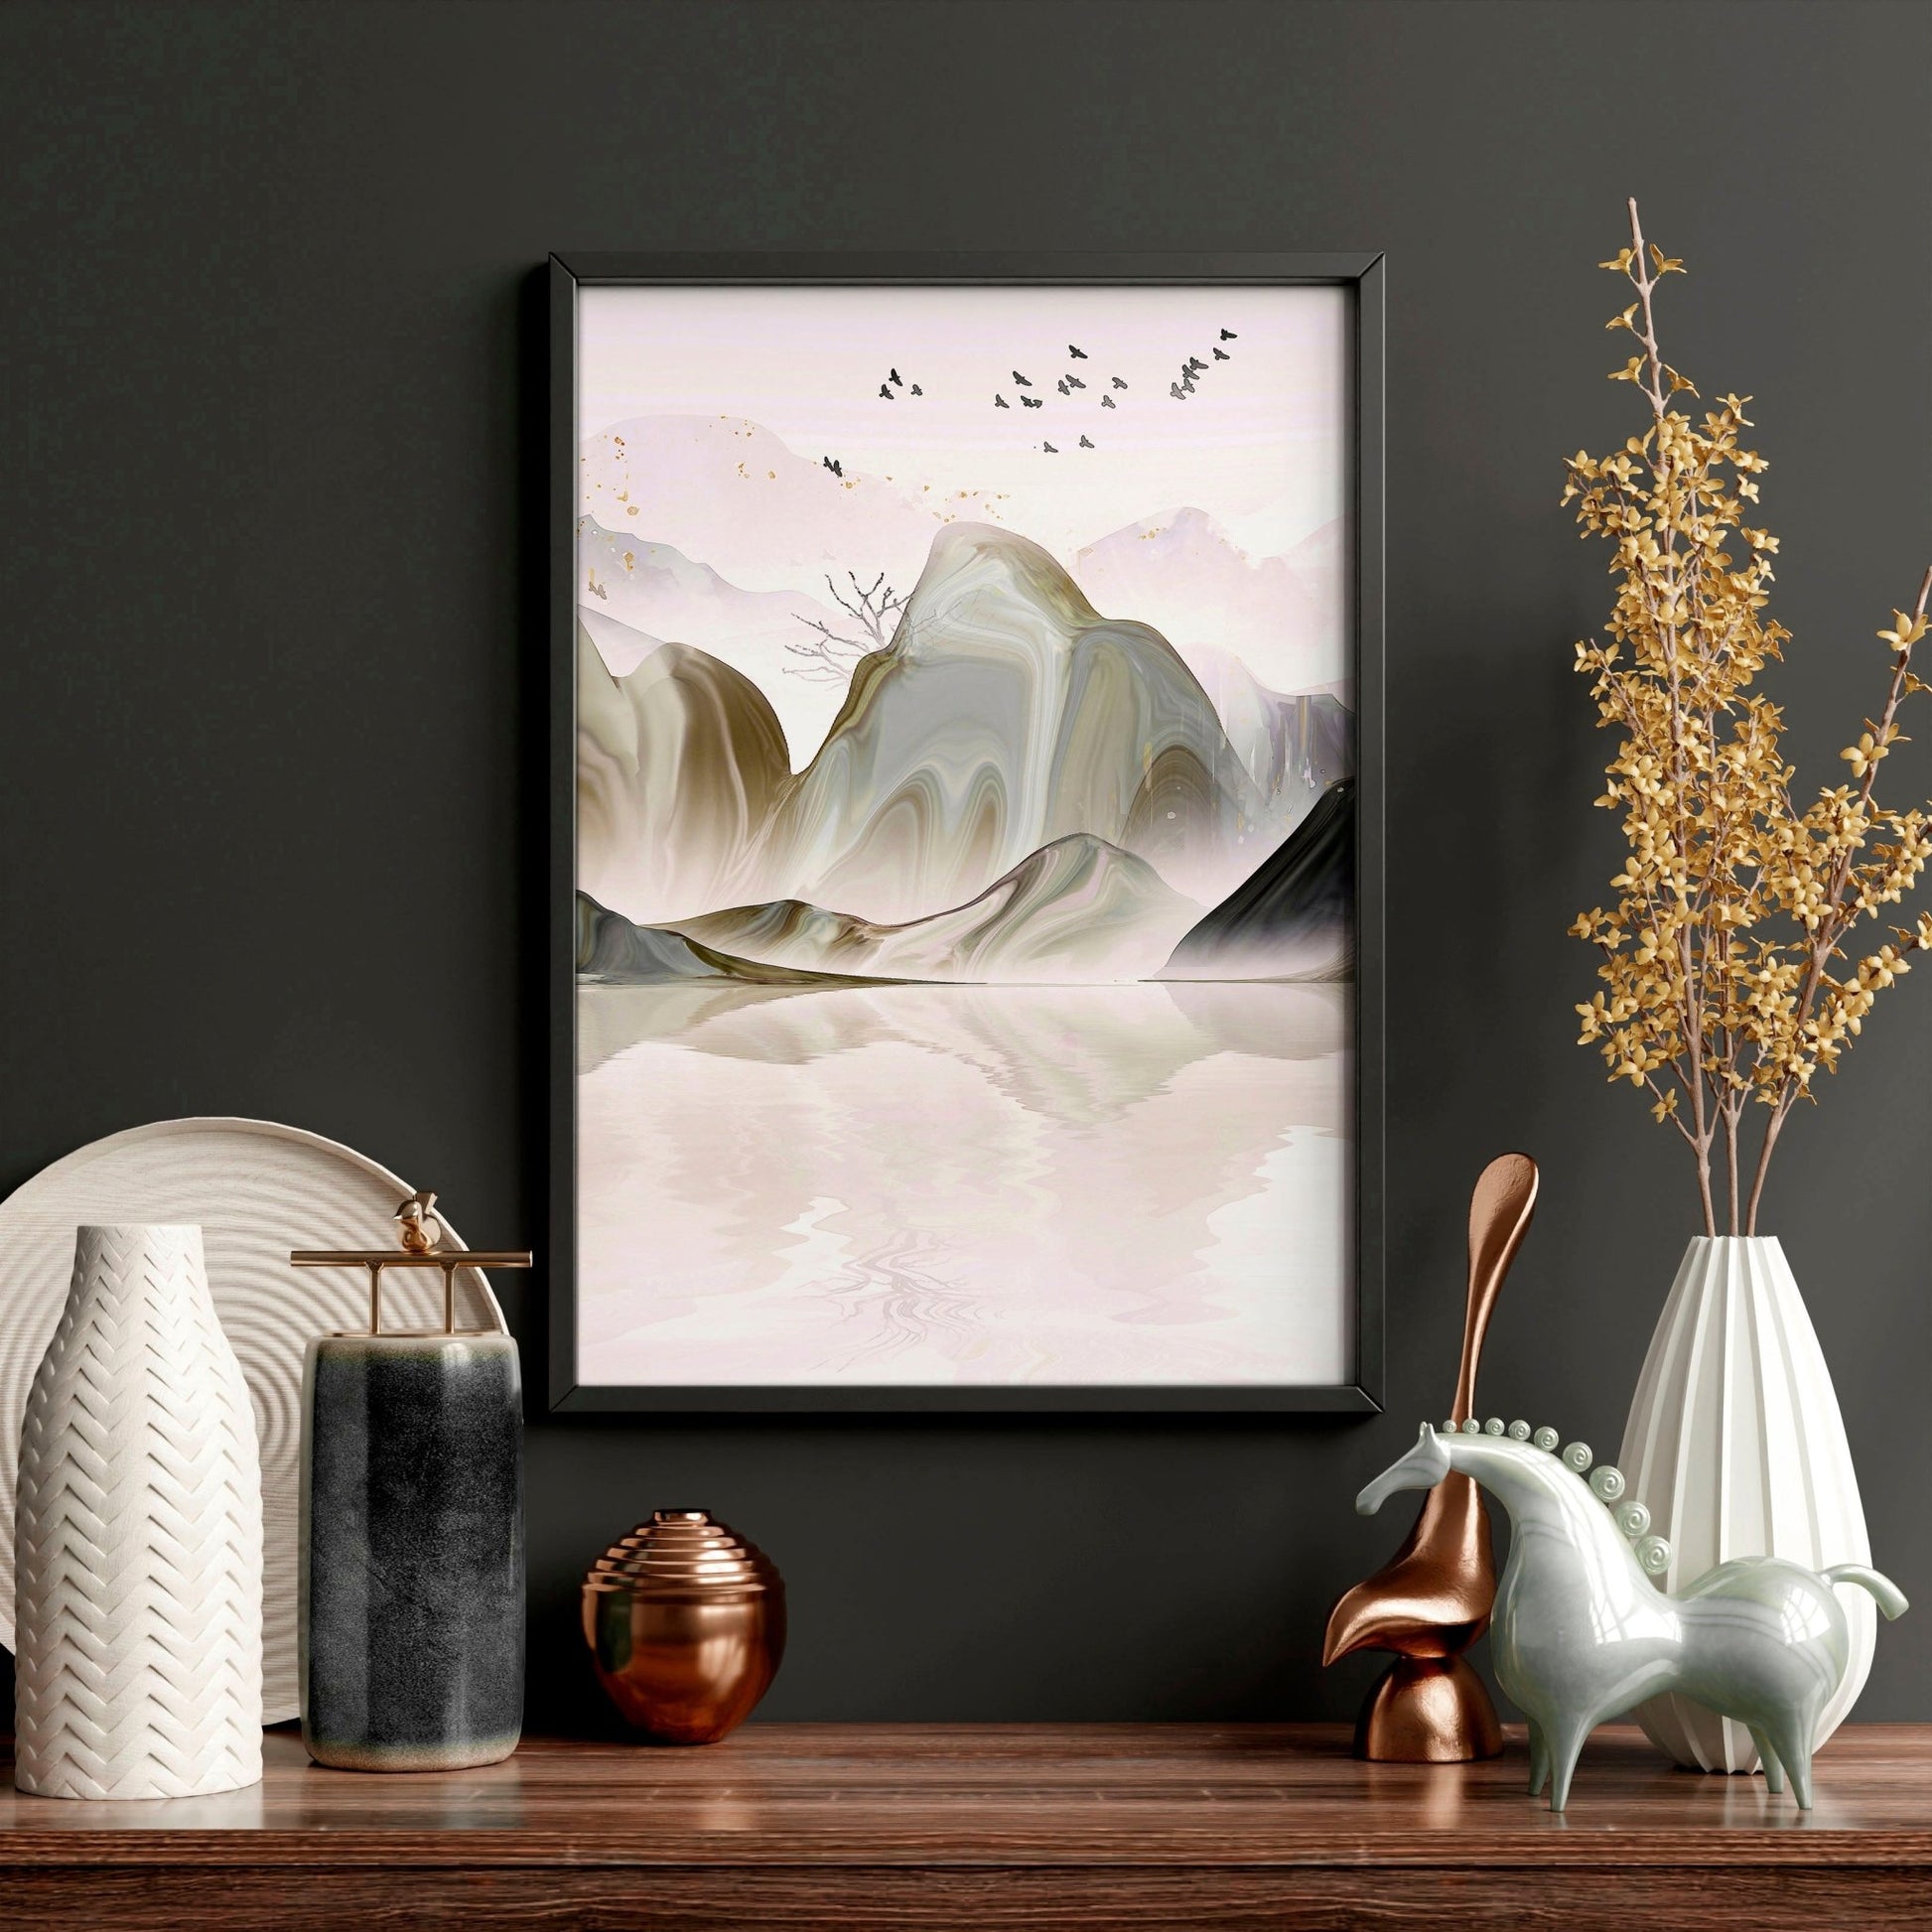 Asian inspired decor | set of 3 wall art prints - About Wall Art